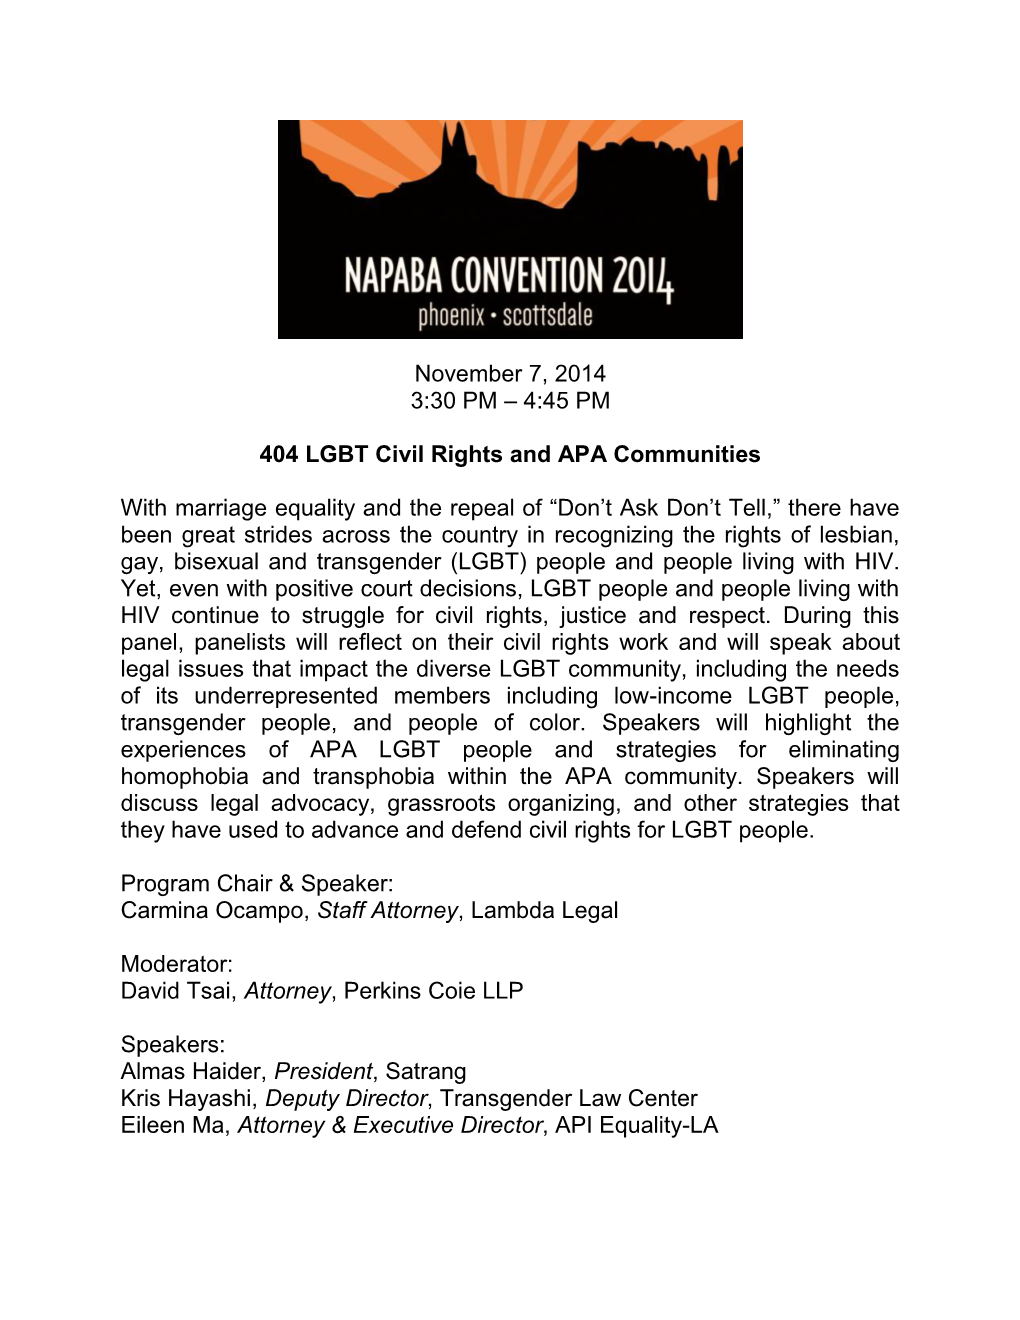 4:45 PM 404 LGBT Civil Rights and APA Communities with Marriage